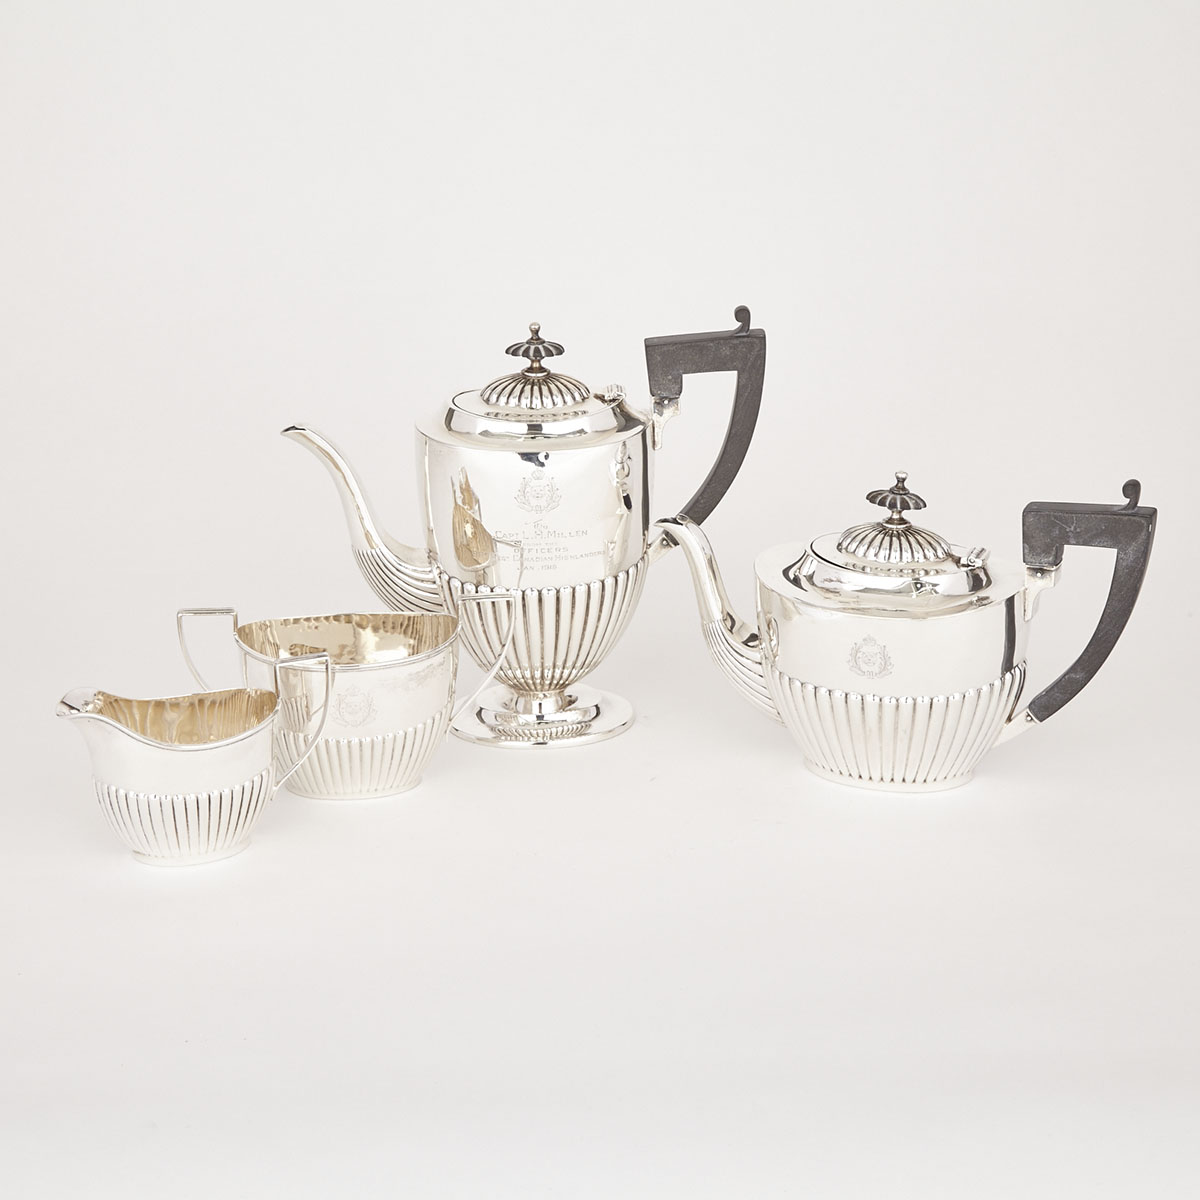 Assembled Canadian Silver Tea and Coffee Service, J.E. Ellis & Co. and Roden Bros., Toronto, Ont., early 20th century